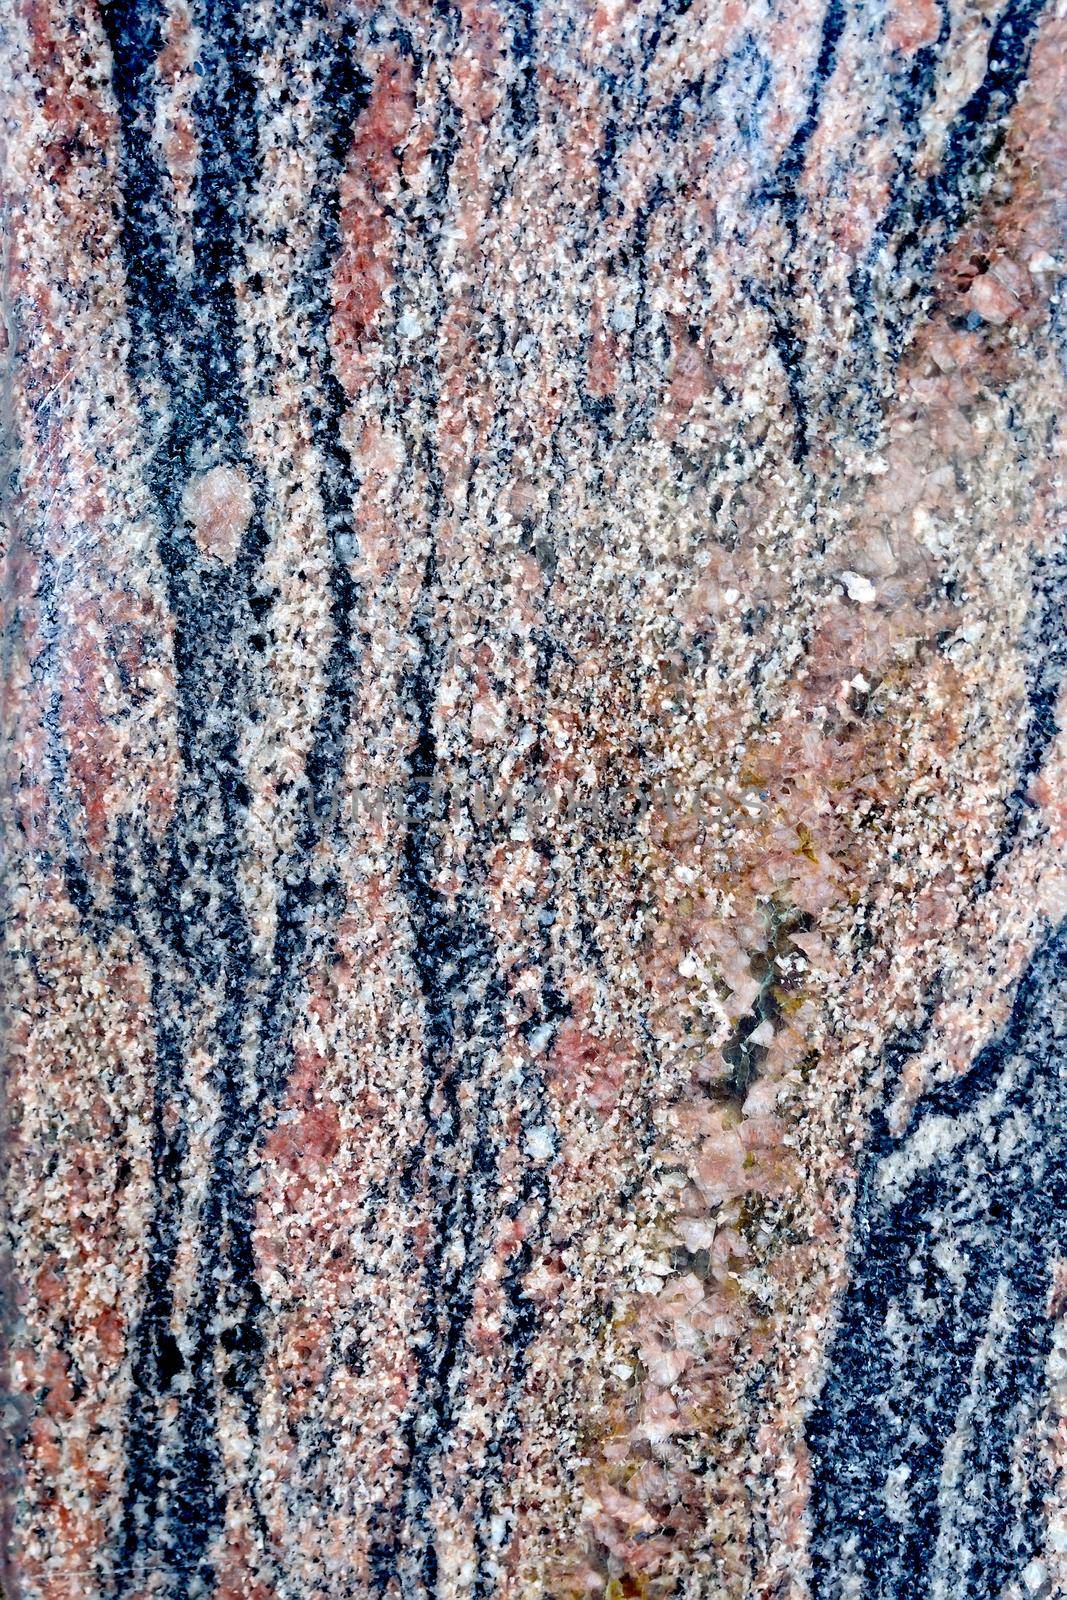 Texture of treated black and brown granite